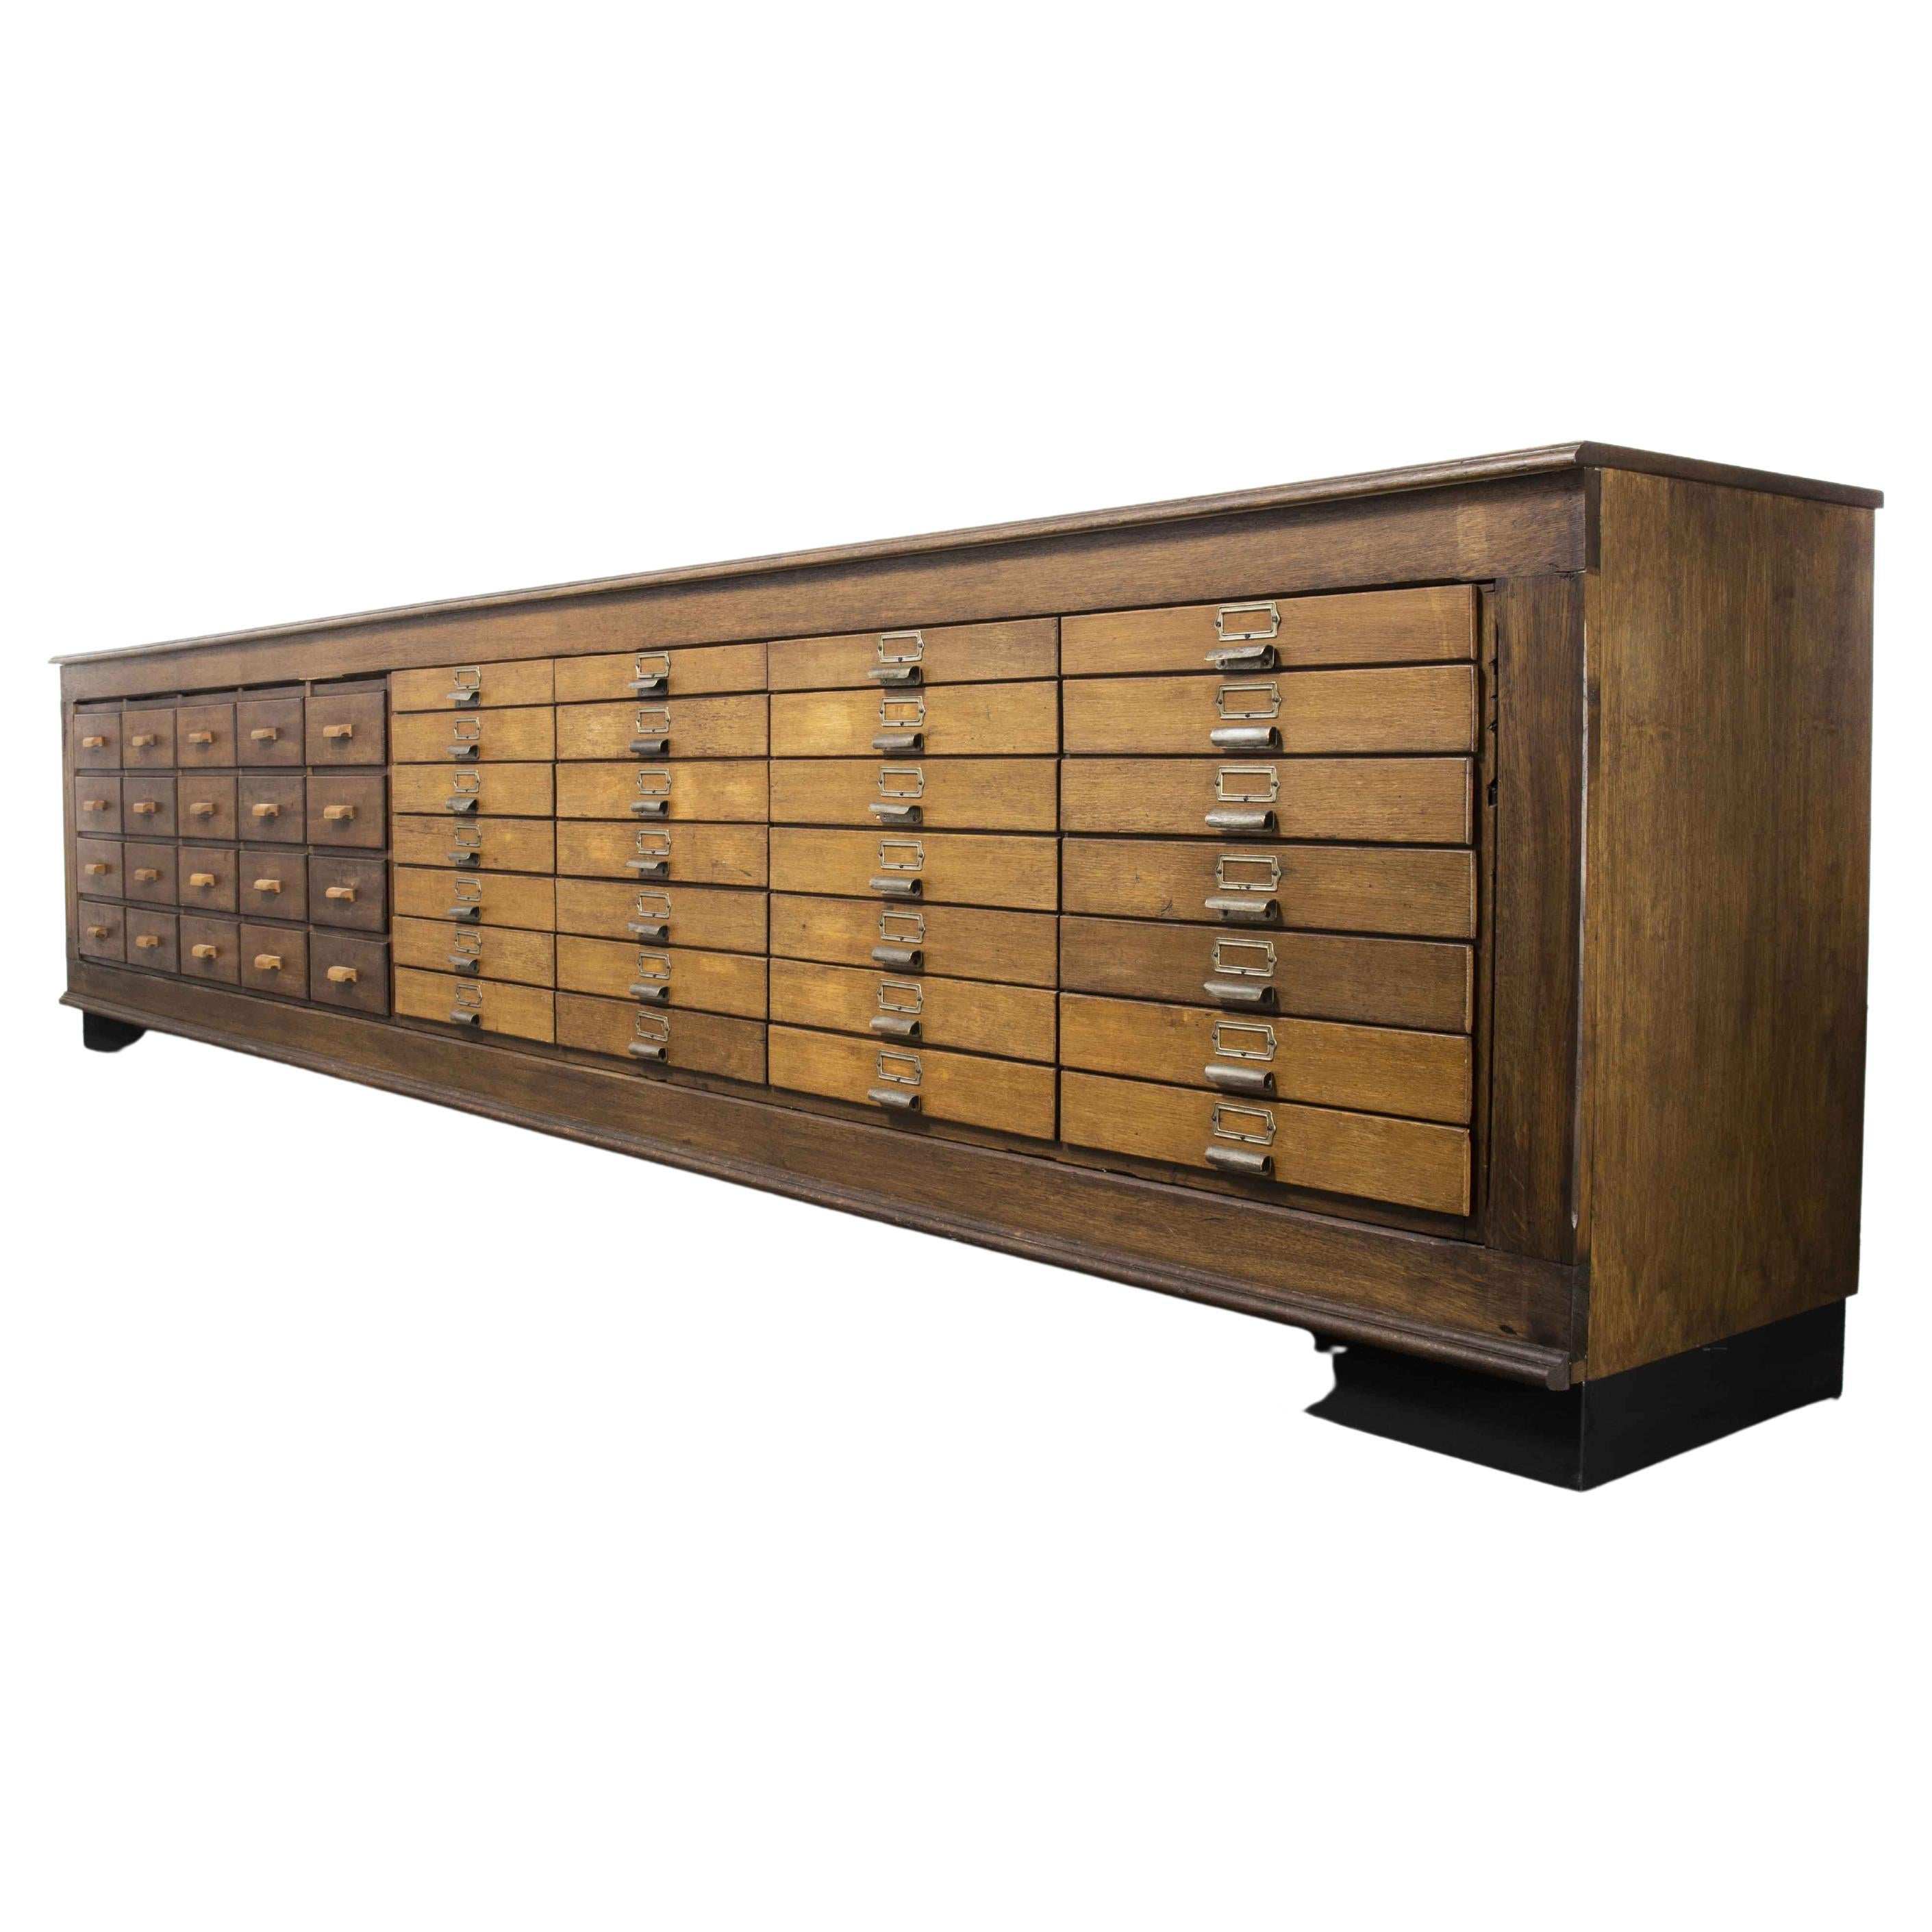 1940’s German Apothecary Long Bank of Drawers, Forty Eight Drawers